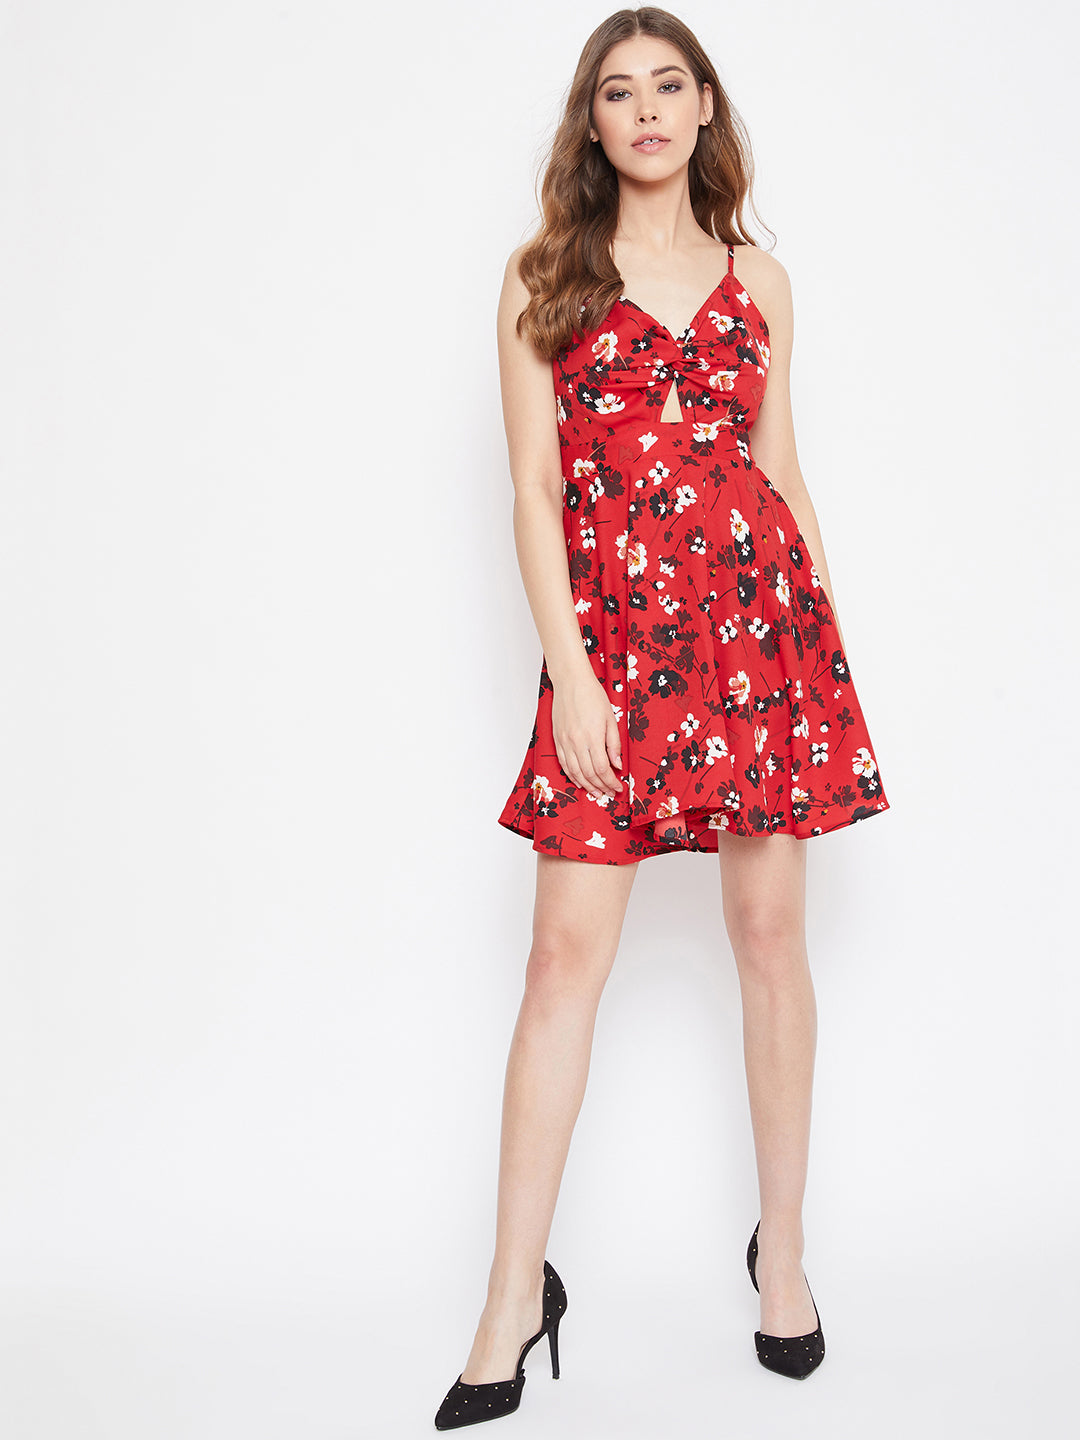 Berrylush Women Red Floral Printed V-Neck Front Twist Knot Fit & Flare Mini Dress